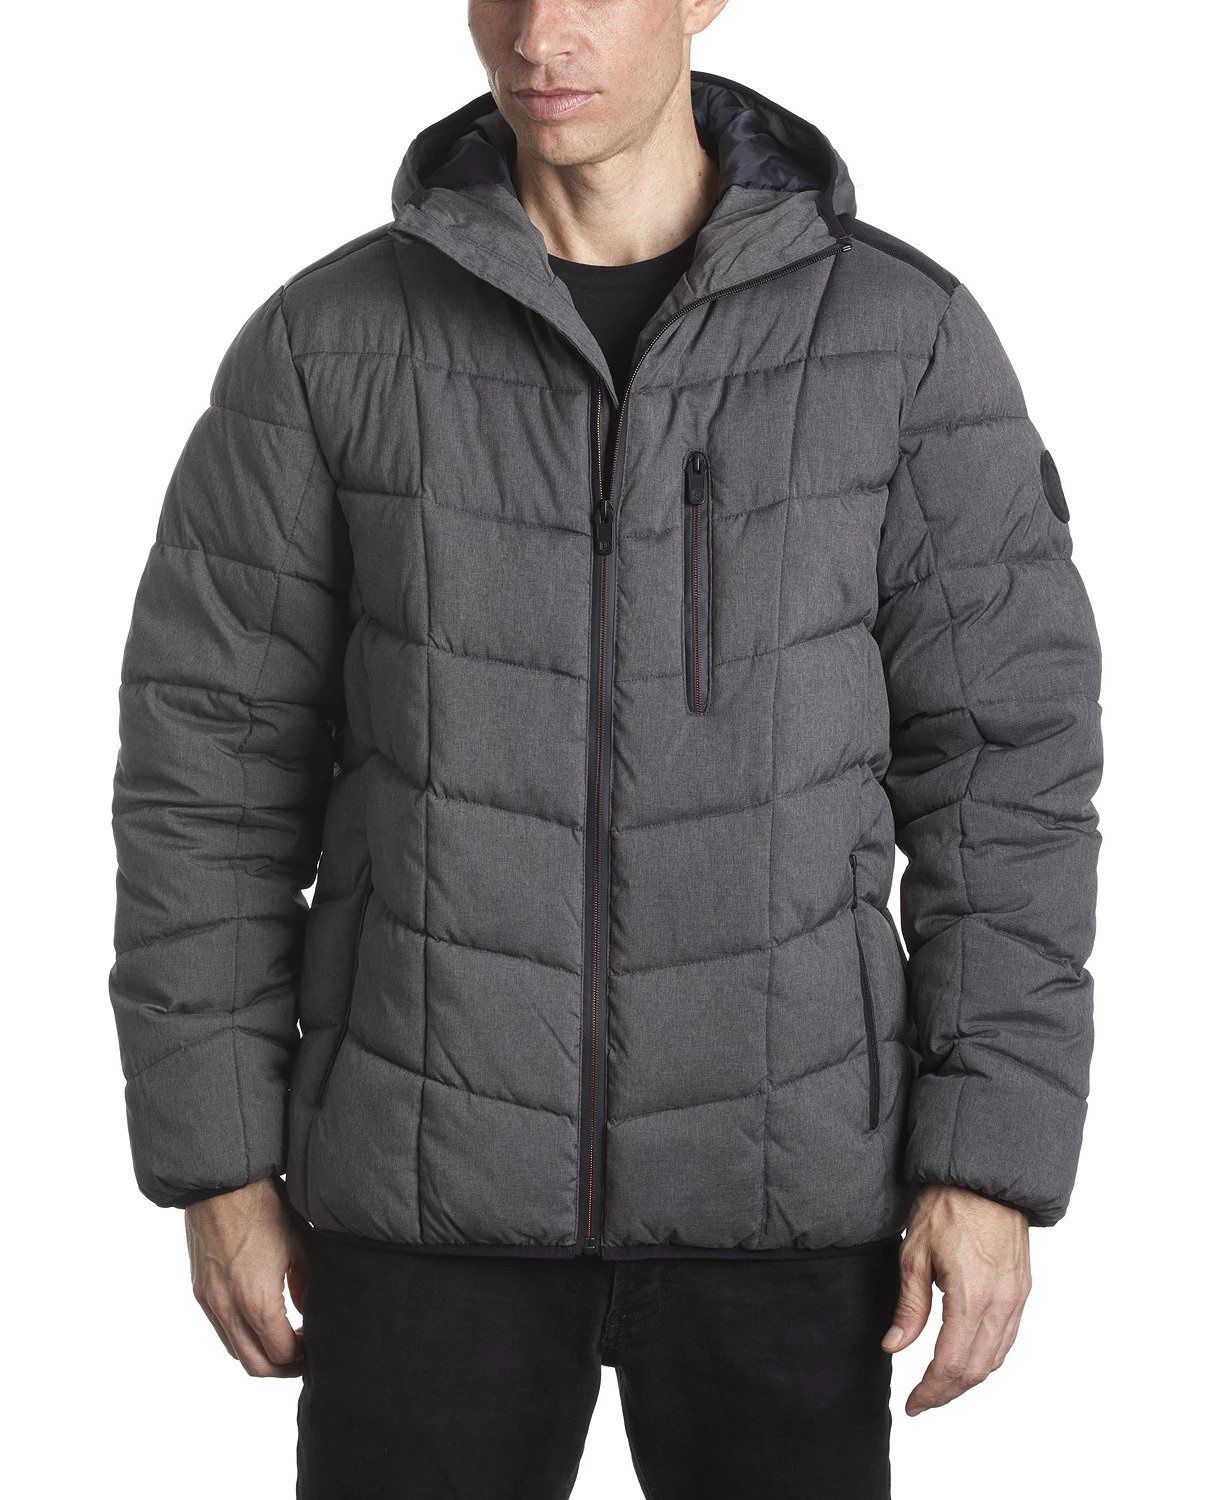 Perry Ellis - Men's Outerwear Men's Quilted Puffer Jacket